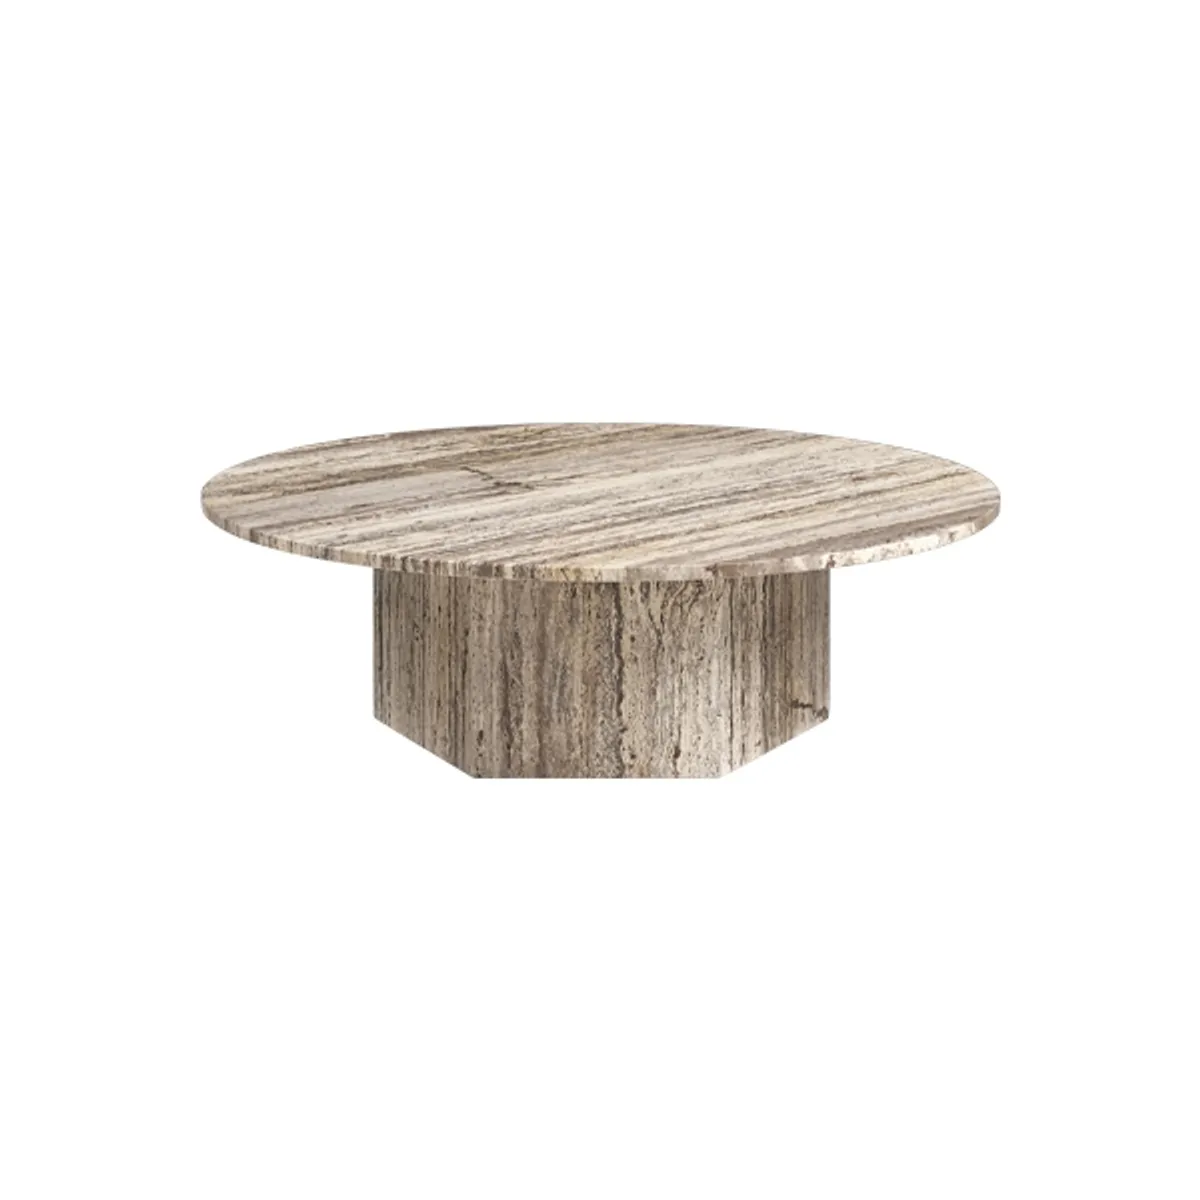 Epic stone coffee table Inside Out Contracts7